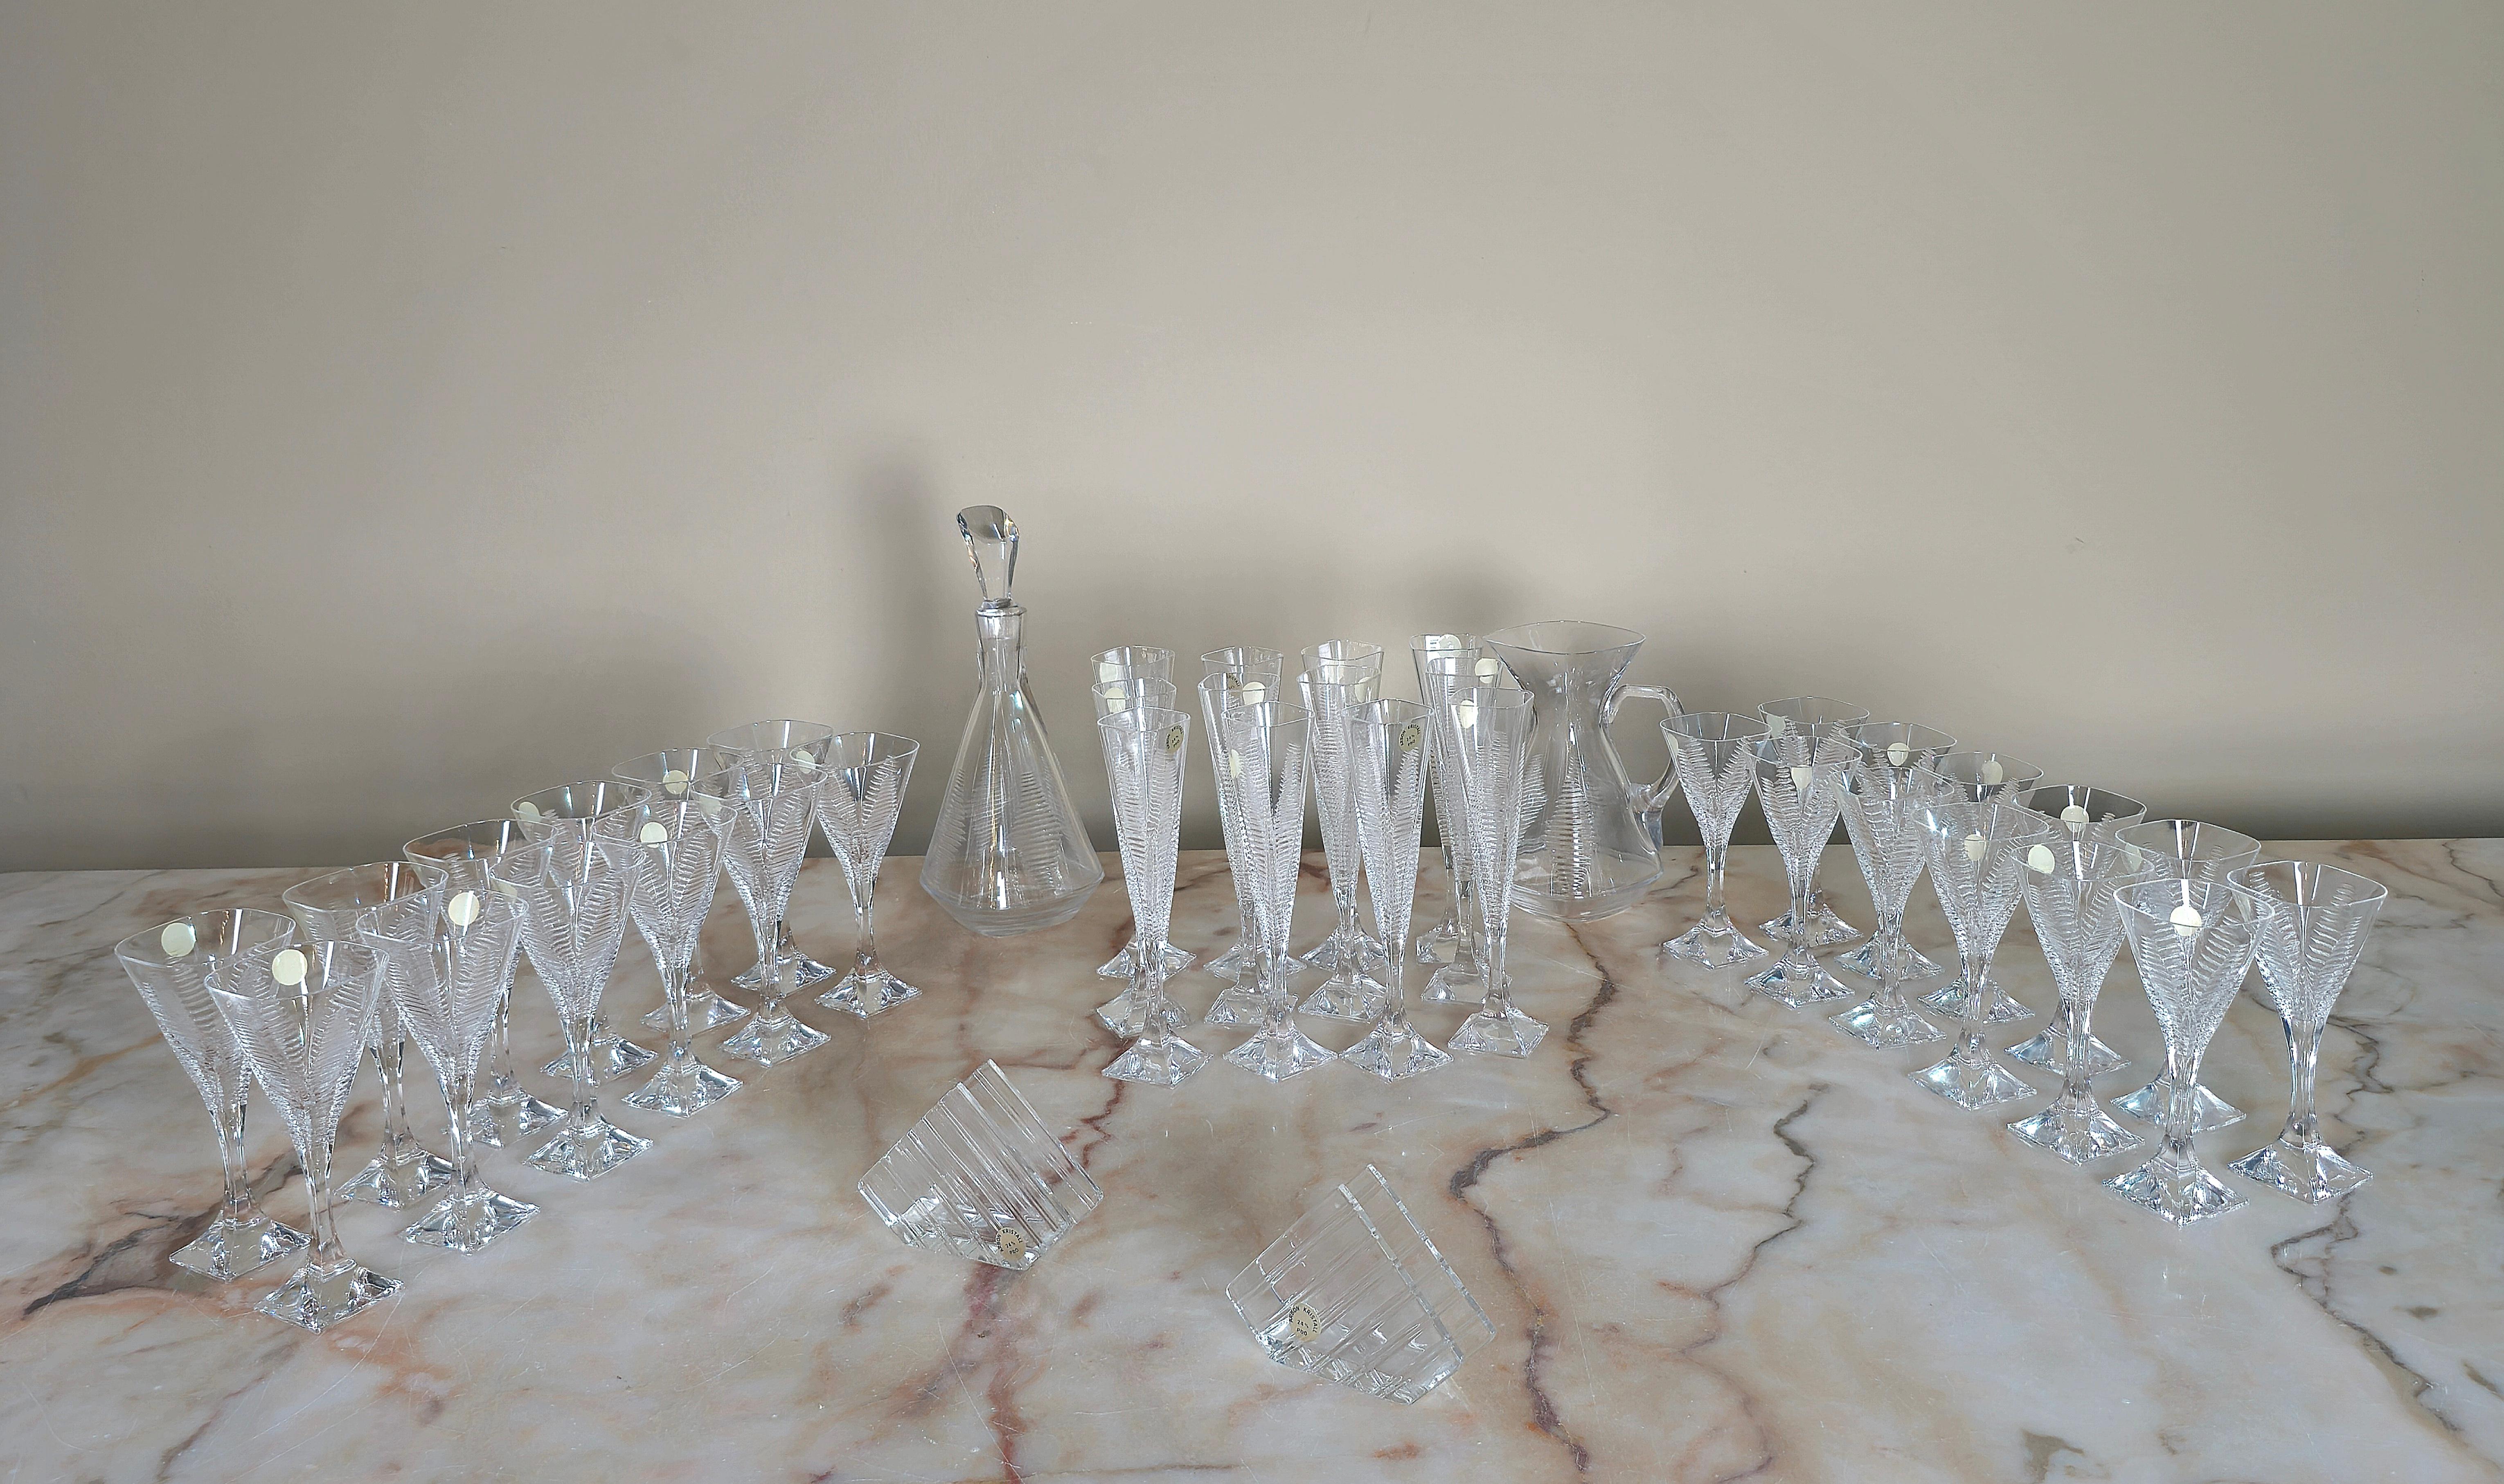 Complete set of 40 pieces made of 24% PBO hand-ground crystal. Composed as follows: 12 water, 12 wine, 12 flutes, 1 jug, a bottle with cap and 2 napkin rings. Made in Switzerland in the 90s, Arbon krystall.




Note: We try to offer our customers an